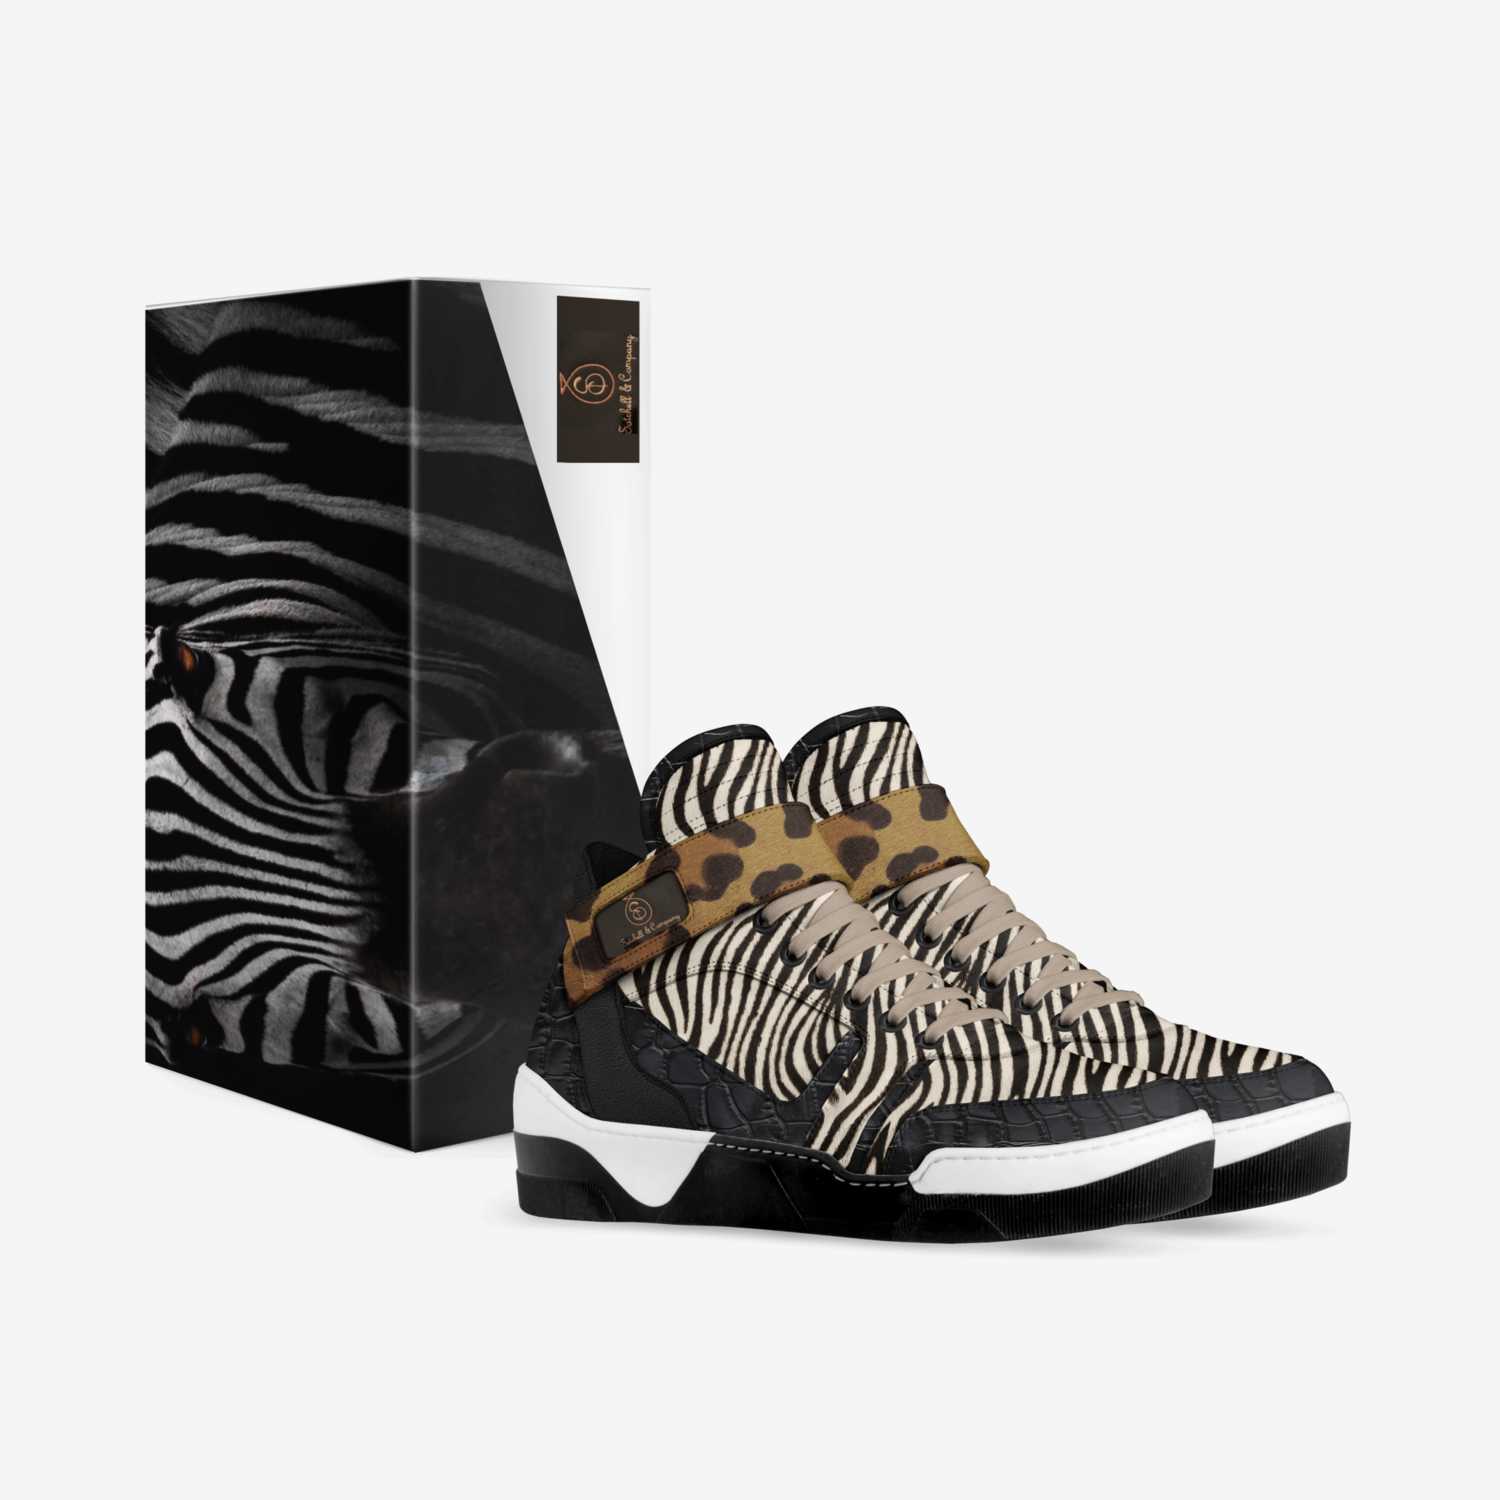 S&C 420 Blk Zebra custom made in Italy shoes by Quincy Satchell | Box view